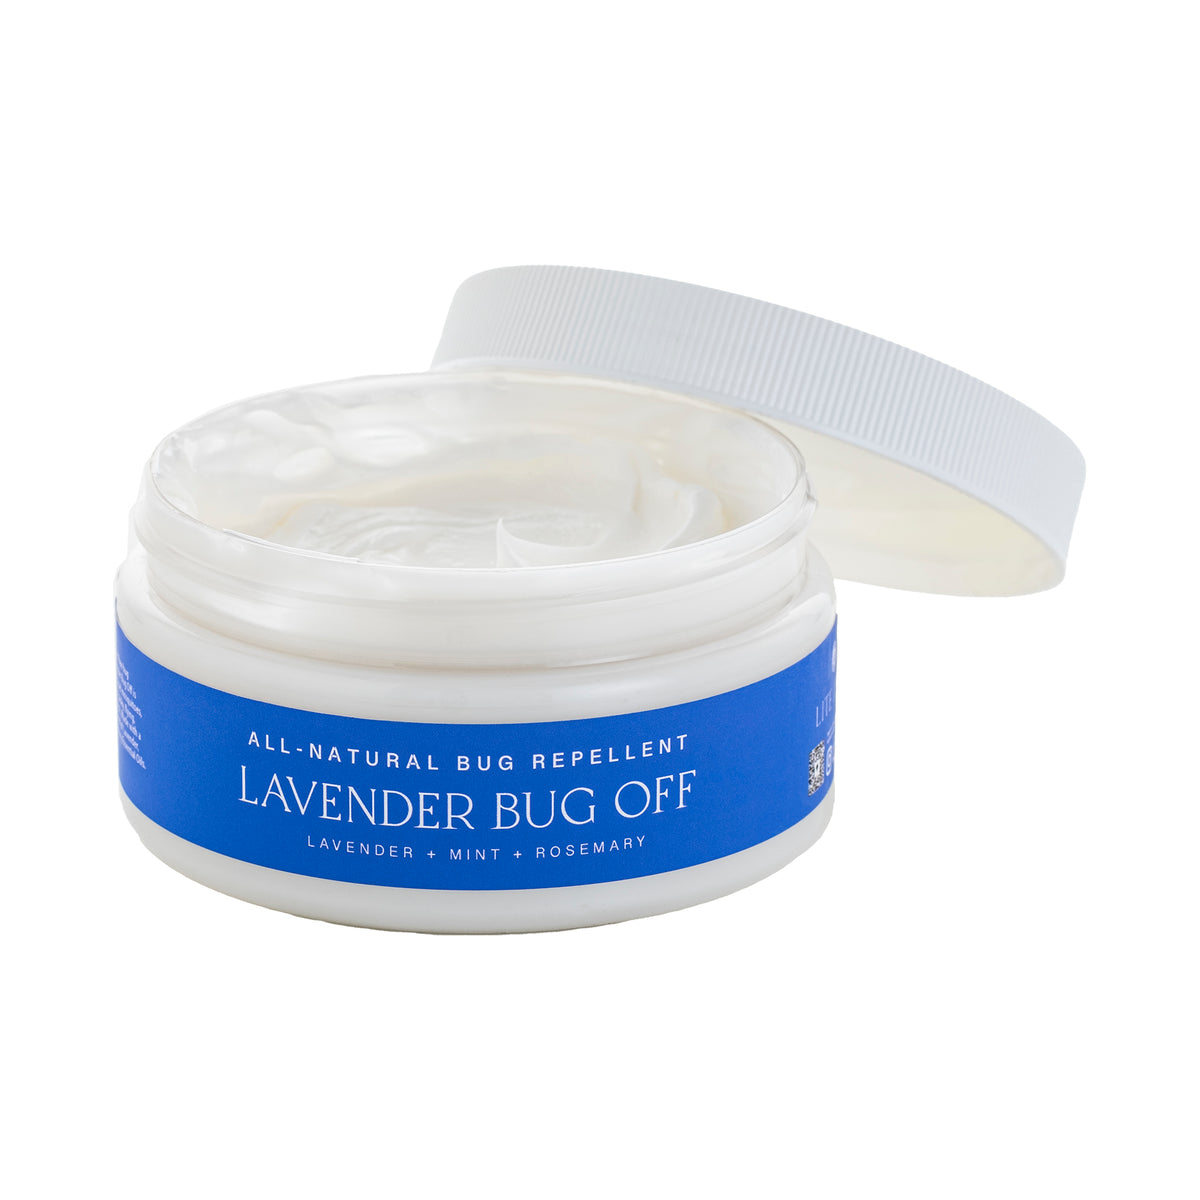 Whipped Body Butter - LAVENDER BUG OFF